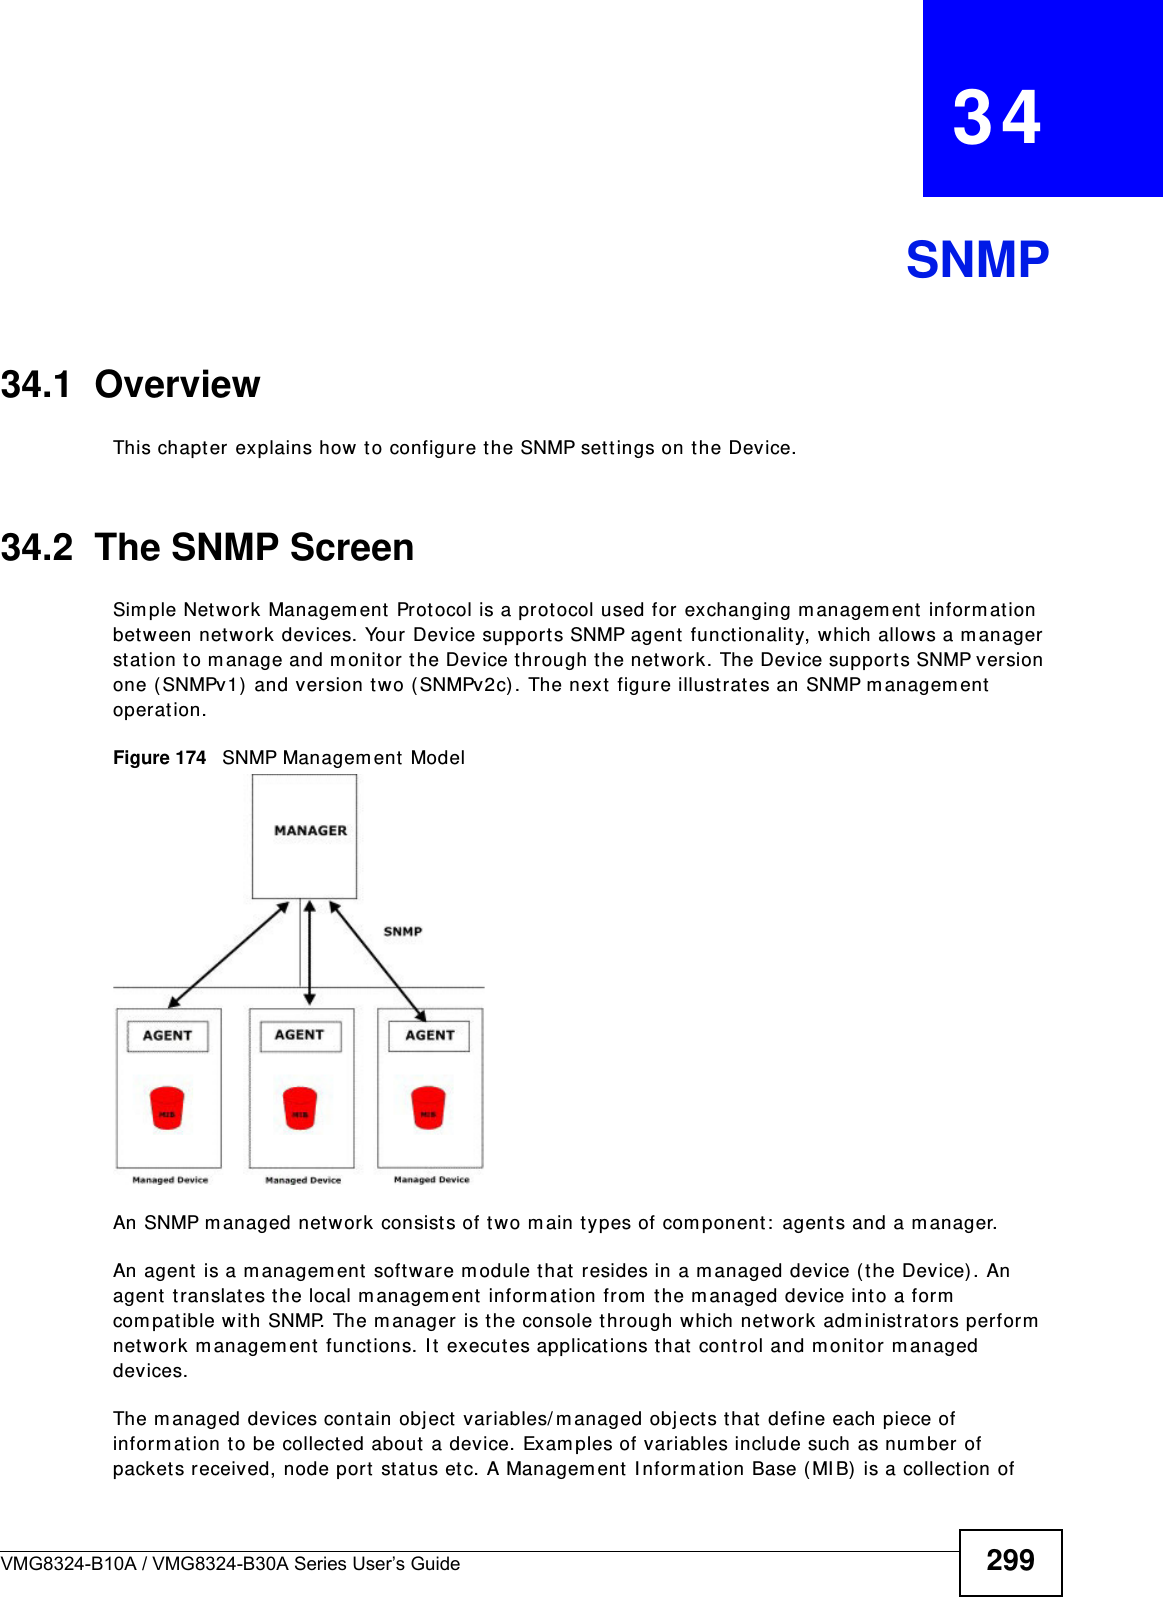 VMG8324-B10A / VMG8324-B30A Series User’s Guide 299CHAPTER   34SNMP34.1  OverviewThis chapt er explains how to configure t he SNMP sett ings on t he Device.34.2  The SNMP ScreenSim ple Network Managem ent Prot ocol is a prot ocol used for exchanging m anagem ent  inform ation bet ween net work devices. Your Device supports SNMP agent funct ionality, which allow s a m anager st ation to m anage and m onitor  t he Device t hrough the network. The Device support s SNMP version one ( SNMPv1)  and version t wo (SNMPv2c) . The next figure illustrates an SNMP managem ent  operat ion.Figure 174   SNMP Managem ent  ModelAn SNMP m anaged network consist s of tw o m ain t y pes of com ponent :  agents and a m anager. An agent  is a m anagem ent software m odule t hat  resides in a m anaged device (t he Device) . An agent translat es the local m anagem ent  inform at ion from  the m anaged device int o a form  com patible with SNMP. The m anager is t he console t hrough which network adm inistrators perform  net work m anagem ent funct ions. I t  executes applications t hat  control and monit or managed devices. The m anaged devices cont ain object  variables/ m anaged objects t hat  define each piece of inform at ion t o be collected about  a device. Exam ples of variables include such as num ber of packets received, node port  stat us et c. A Managem ent  I nform ation Base ( MI B)  is a collect ion of 